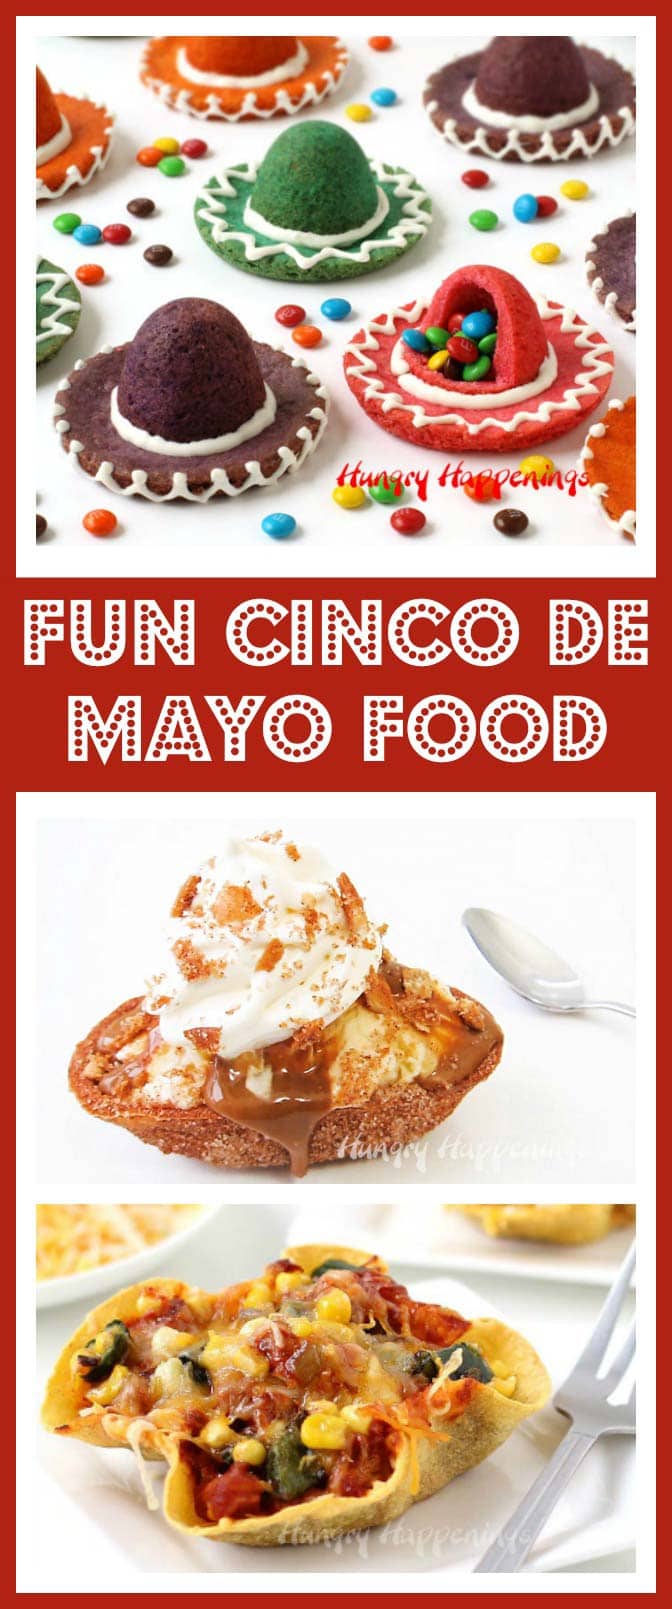 Celebrate with some festive Cinco de Mayo recipes like Sombrero Piñata Cookies, Churro Sundaes, or Enchilada Bowls. They are perfect for any Mexican fiesta.